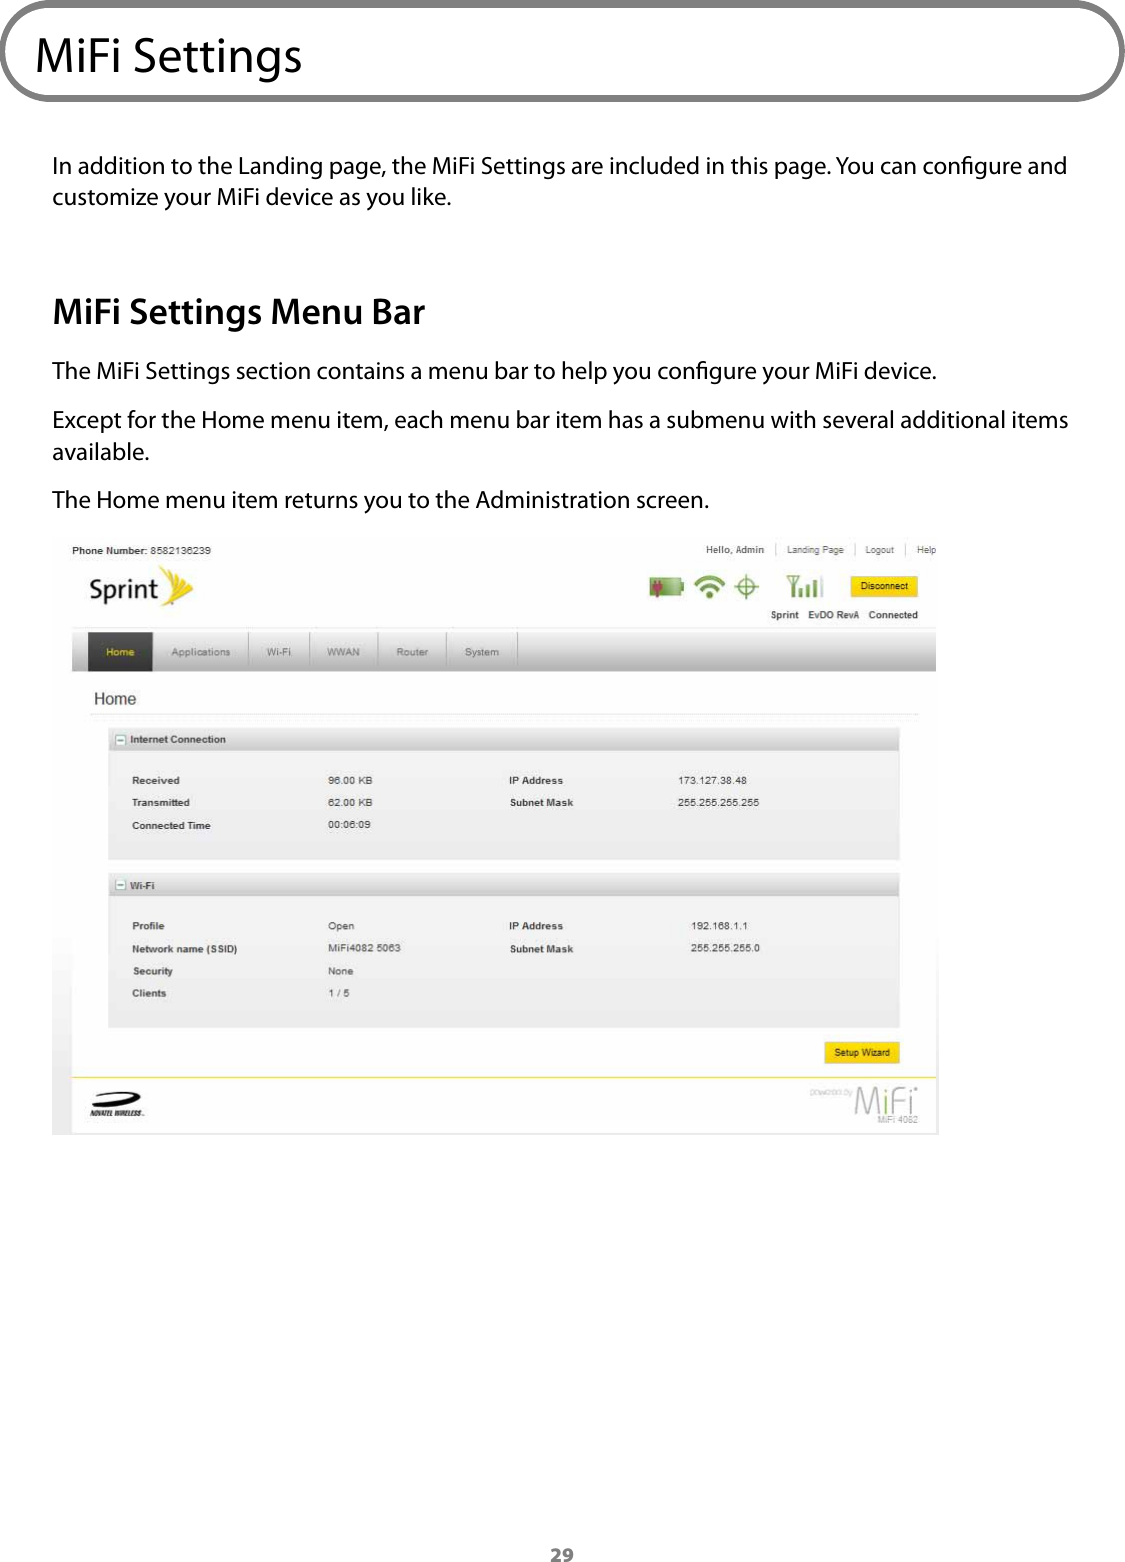 29MiFi SettingsIn addition to the Landing page, the MiFi Settings are included in this page. You can congure and customize your MiFi device as you like.MiFi Settings Menu BarThe MiFi Settings section contains a menu bar to help you congure your MiFi device.Except for the Home menu item, each menu bar item has a submenu with several additional items available.The Home menu item returns you to the Administration screen.